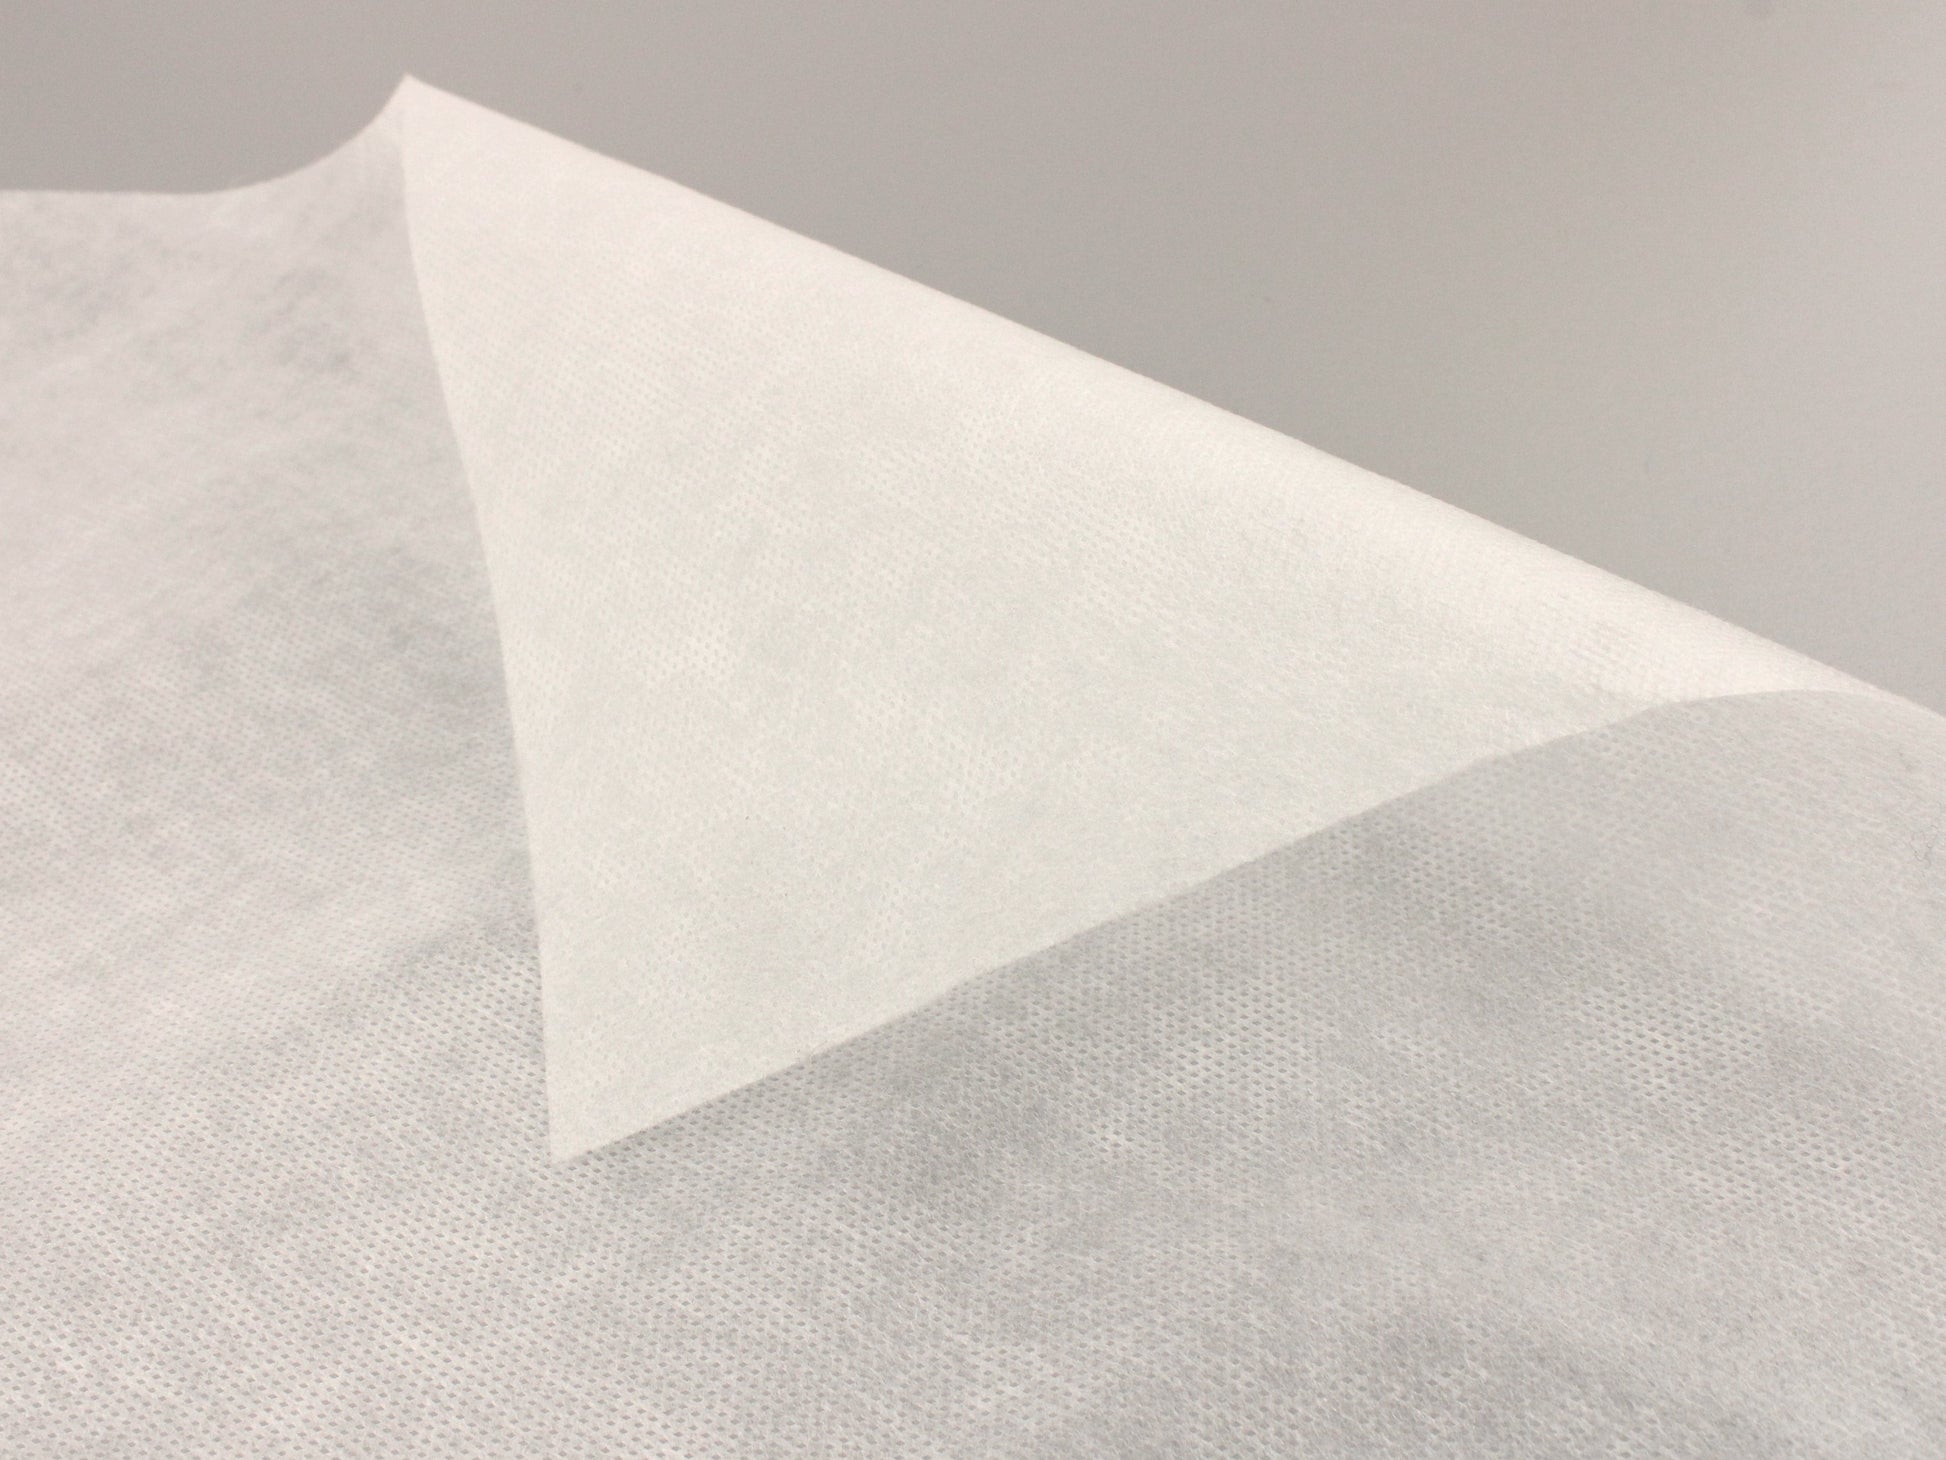 Water Soluble Paper - various sizes - The Makerss